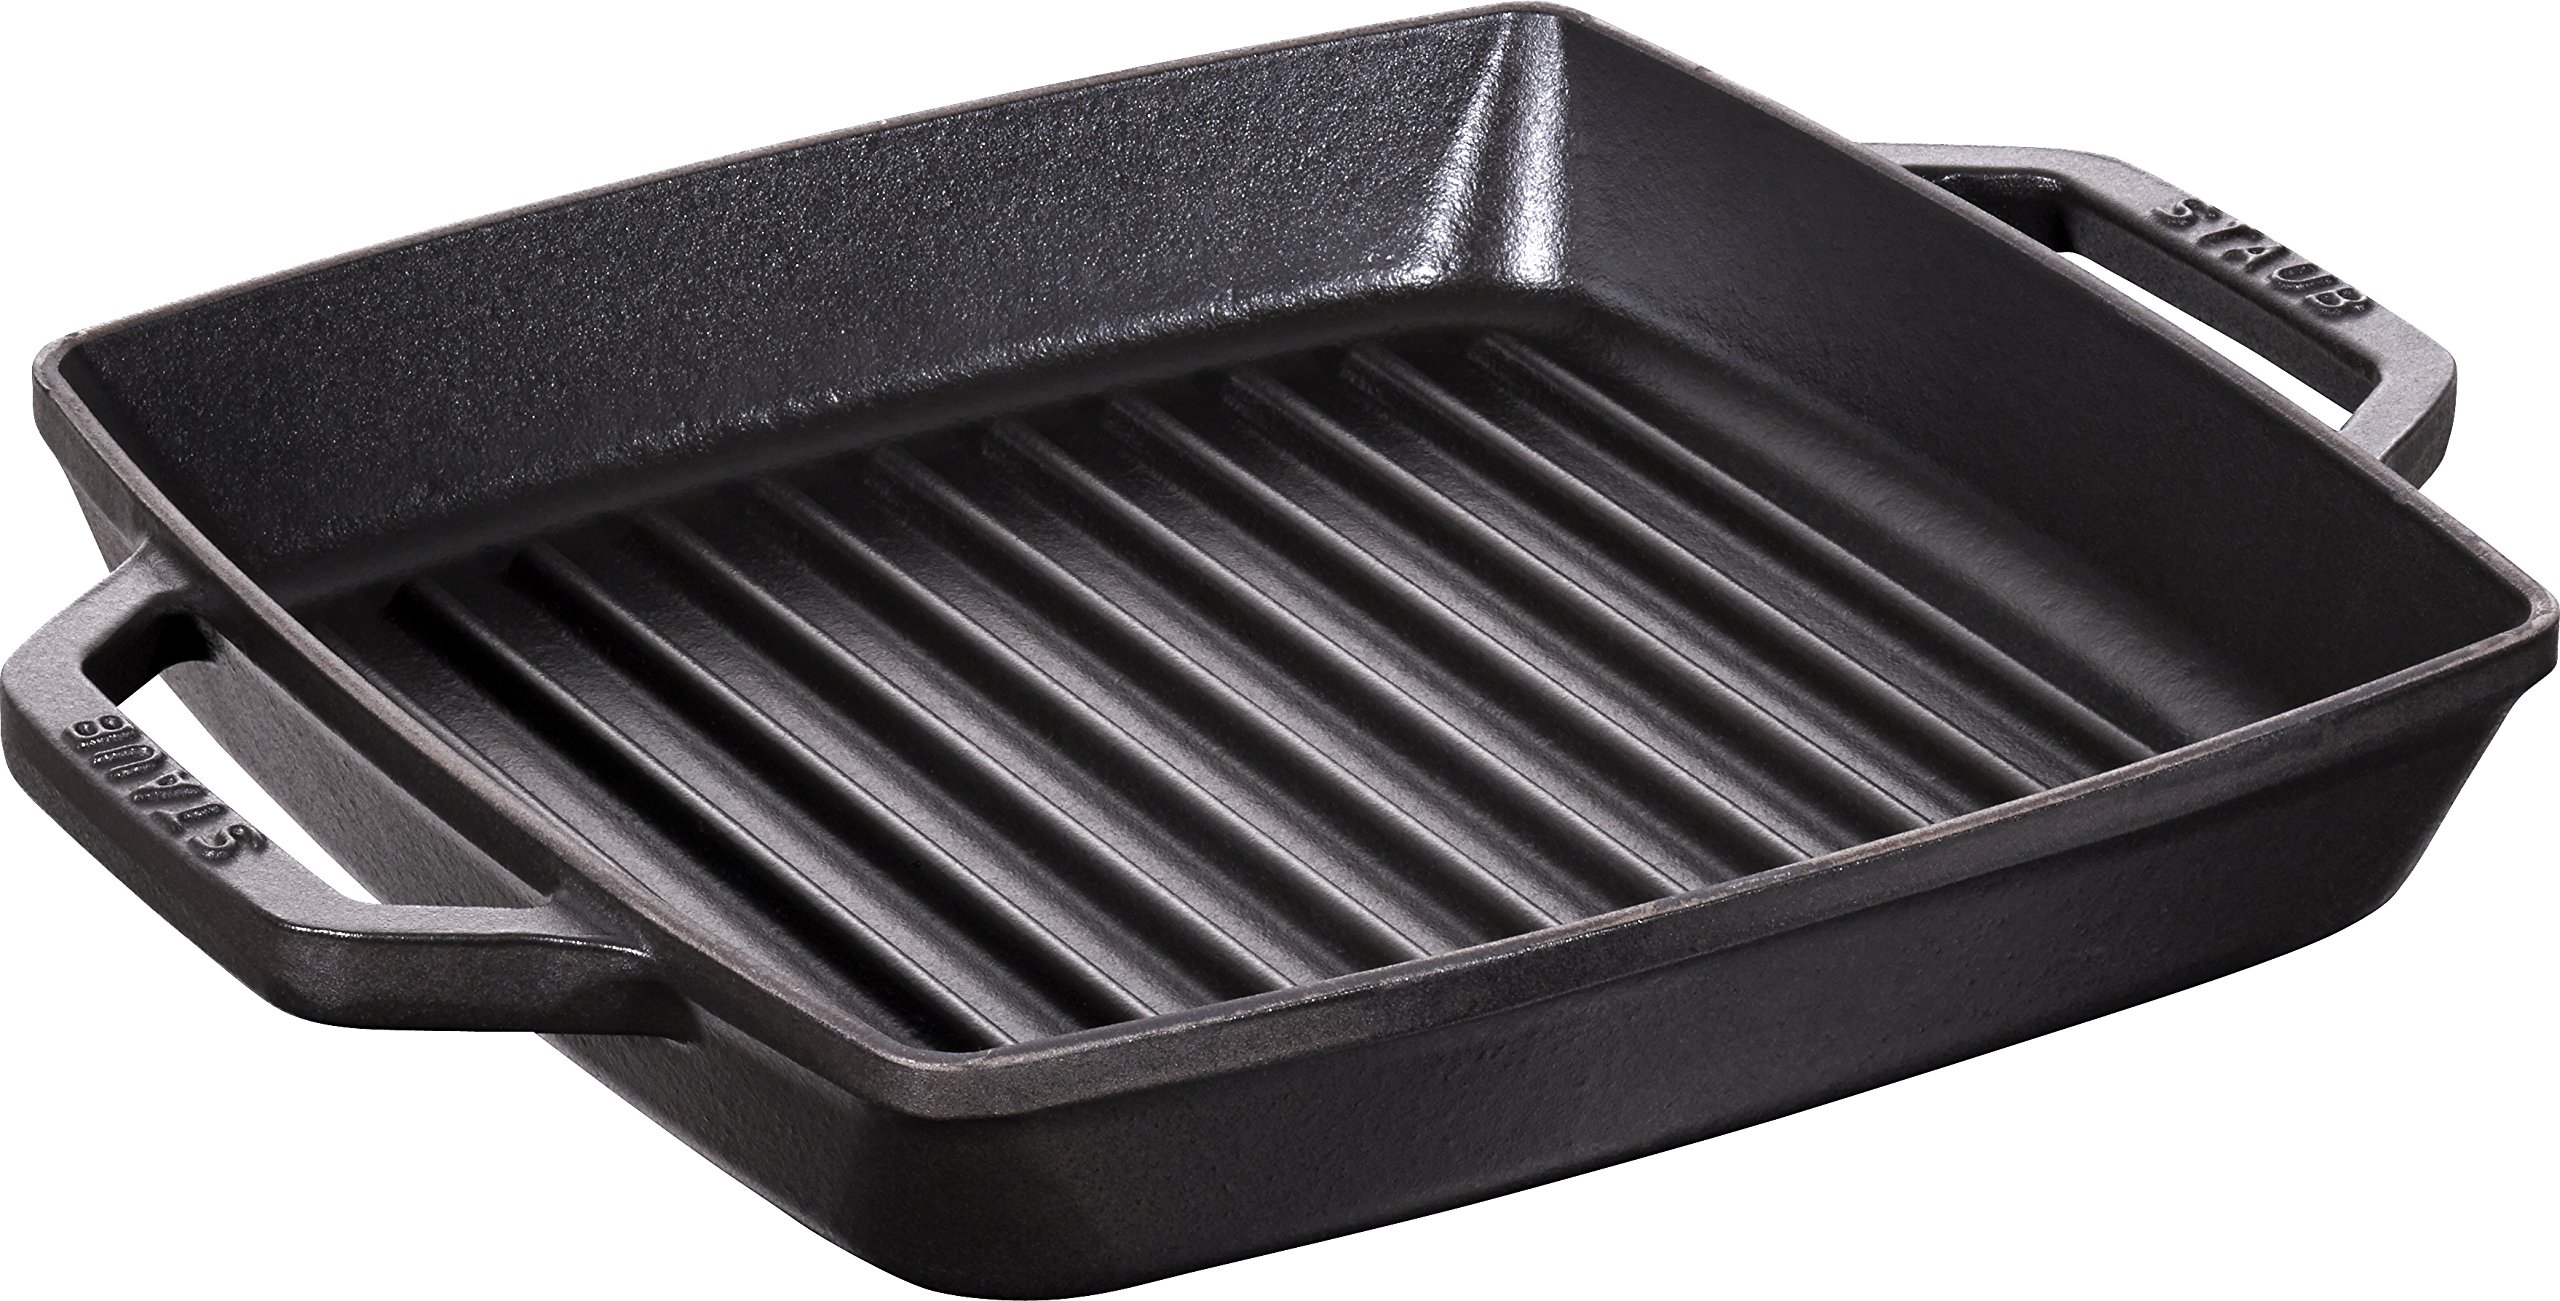 Staub Double Handle Grill Square 9 